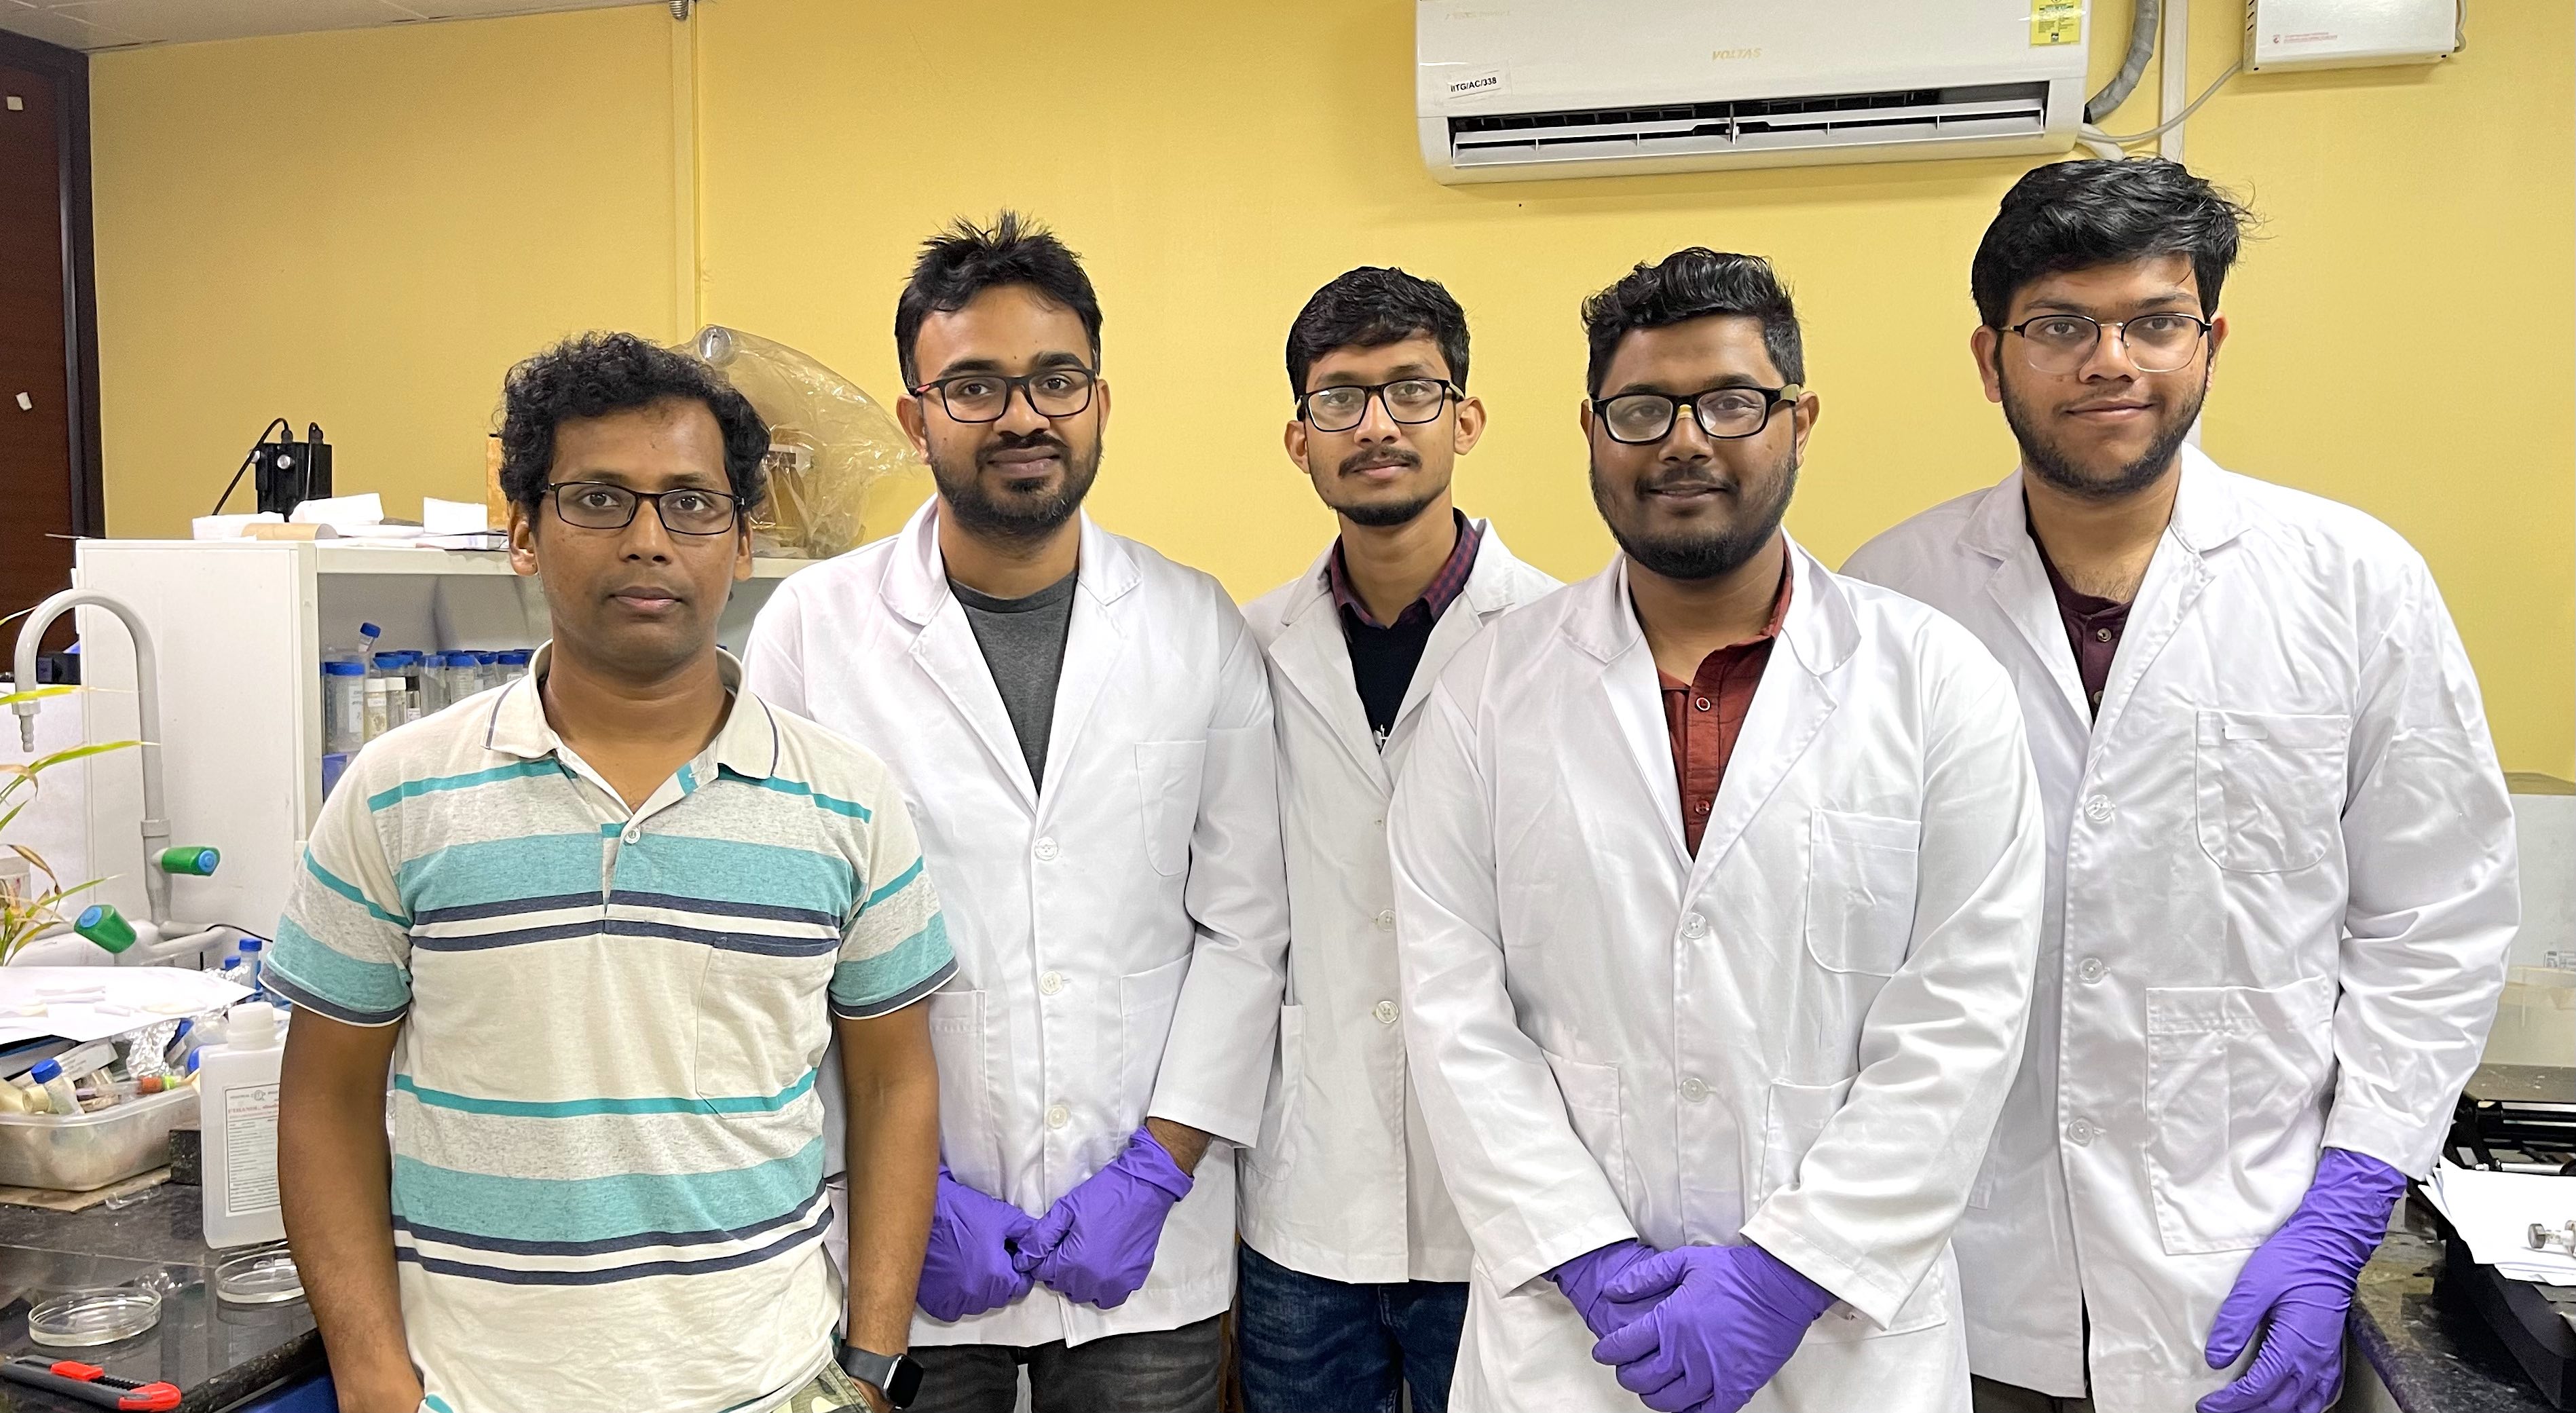 IIT Guwahati researchers develop ‘Time bomb’ liquid marbles with Nanoclay for controlled drug delivery